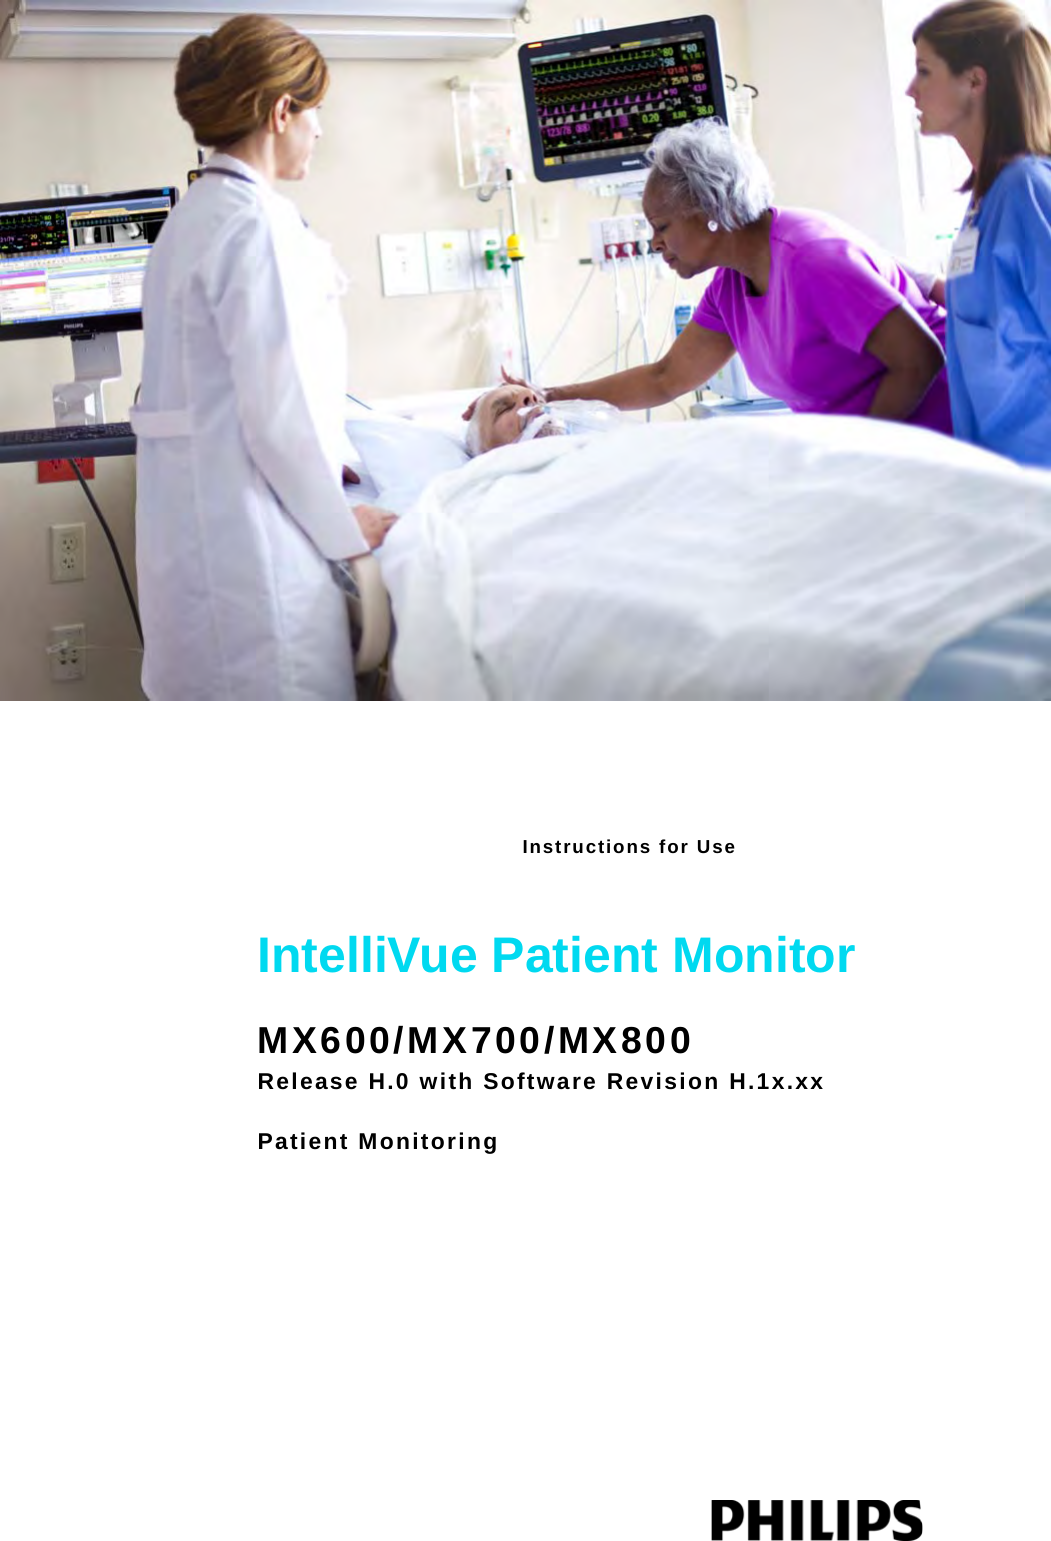 Instructions for UseIntelliVue Patient MonitorMX600/MX700/MX800Release H.0 with Software Revision H.1x.xxPatient Monitoring